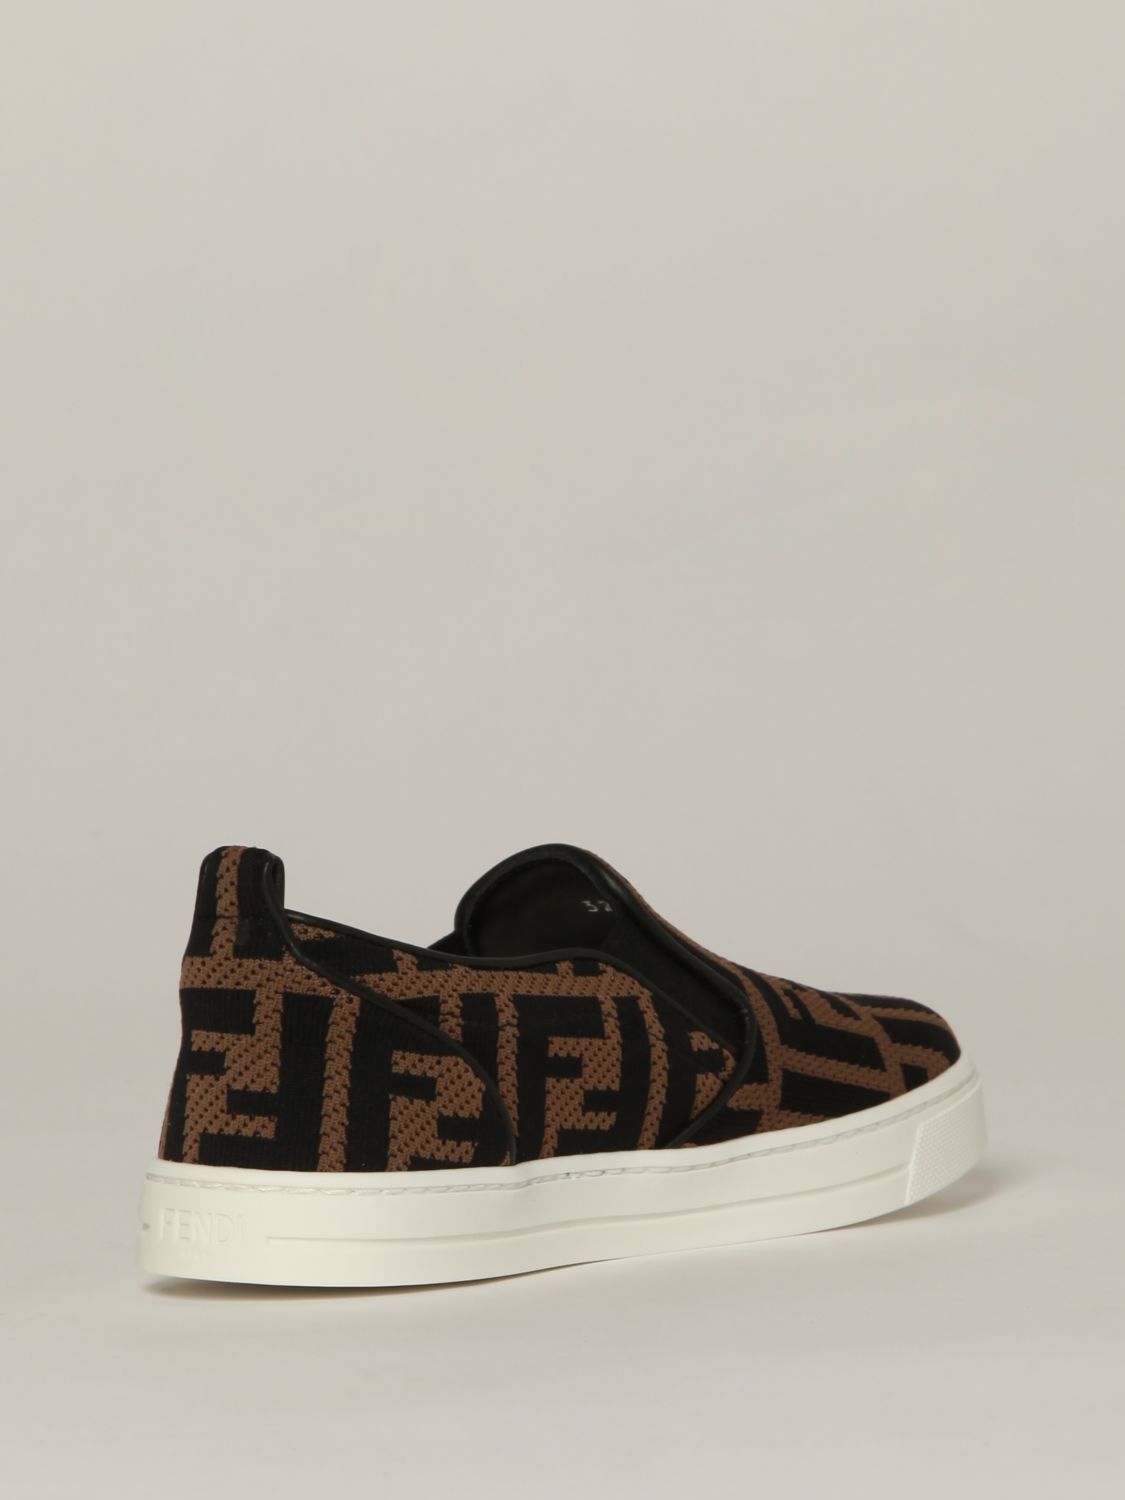 FENDI: sneakers with all over FF logo - Brown | Fendi shoes JMR368 AD8D ...